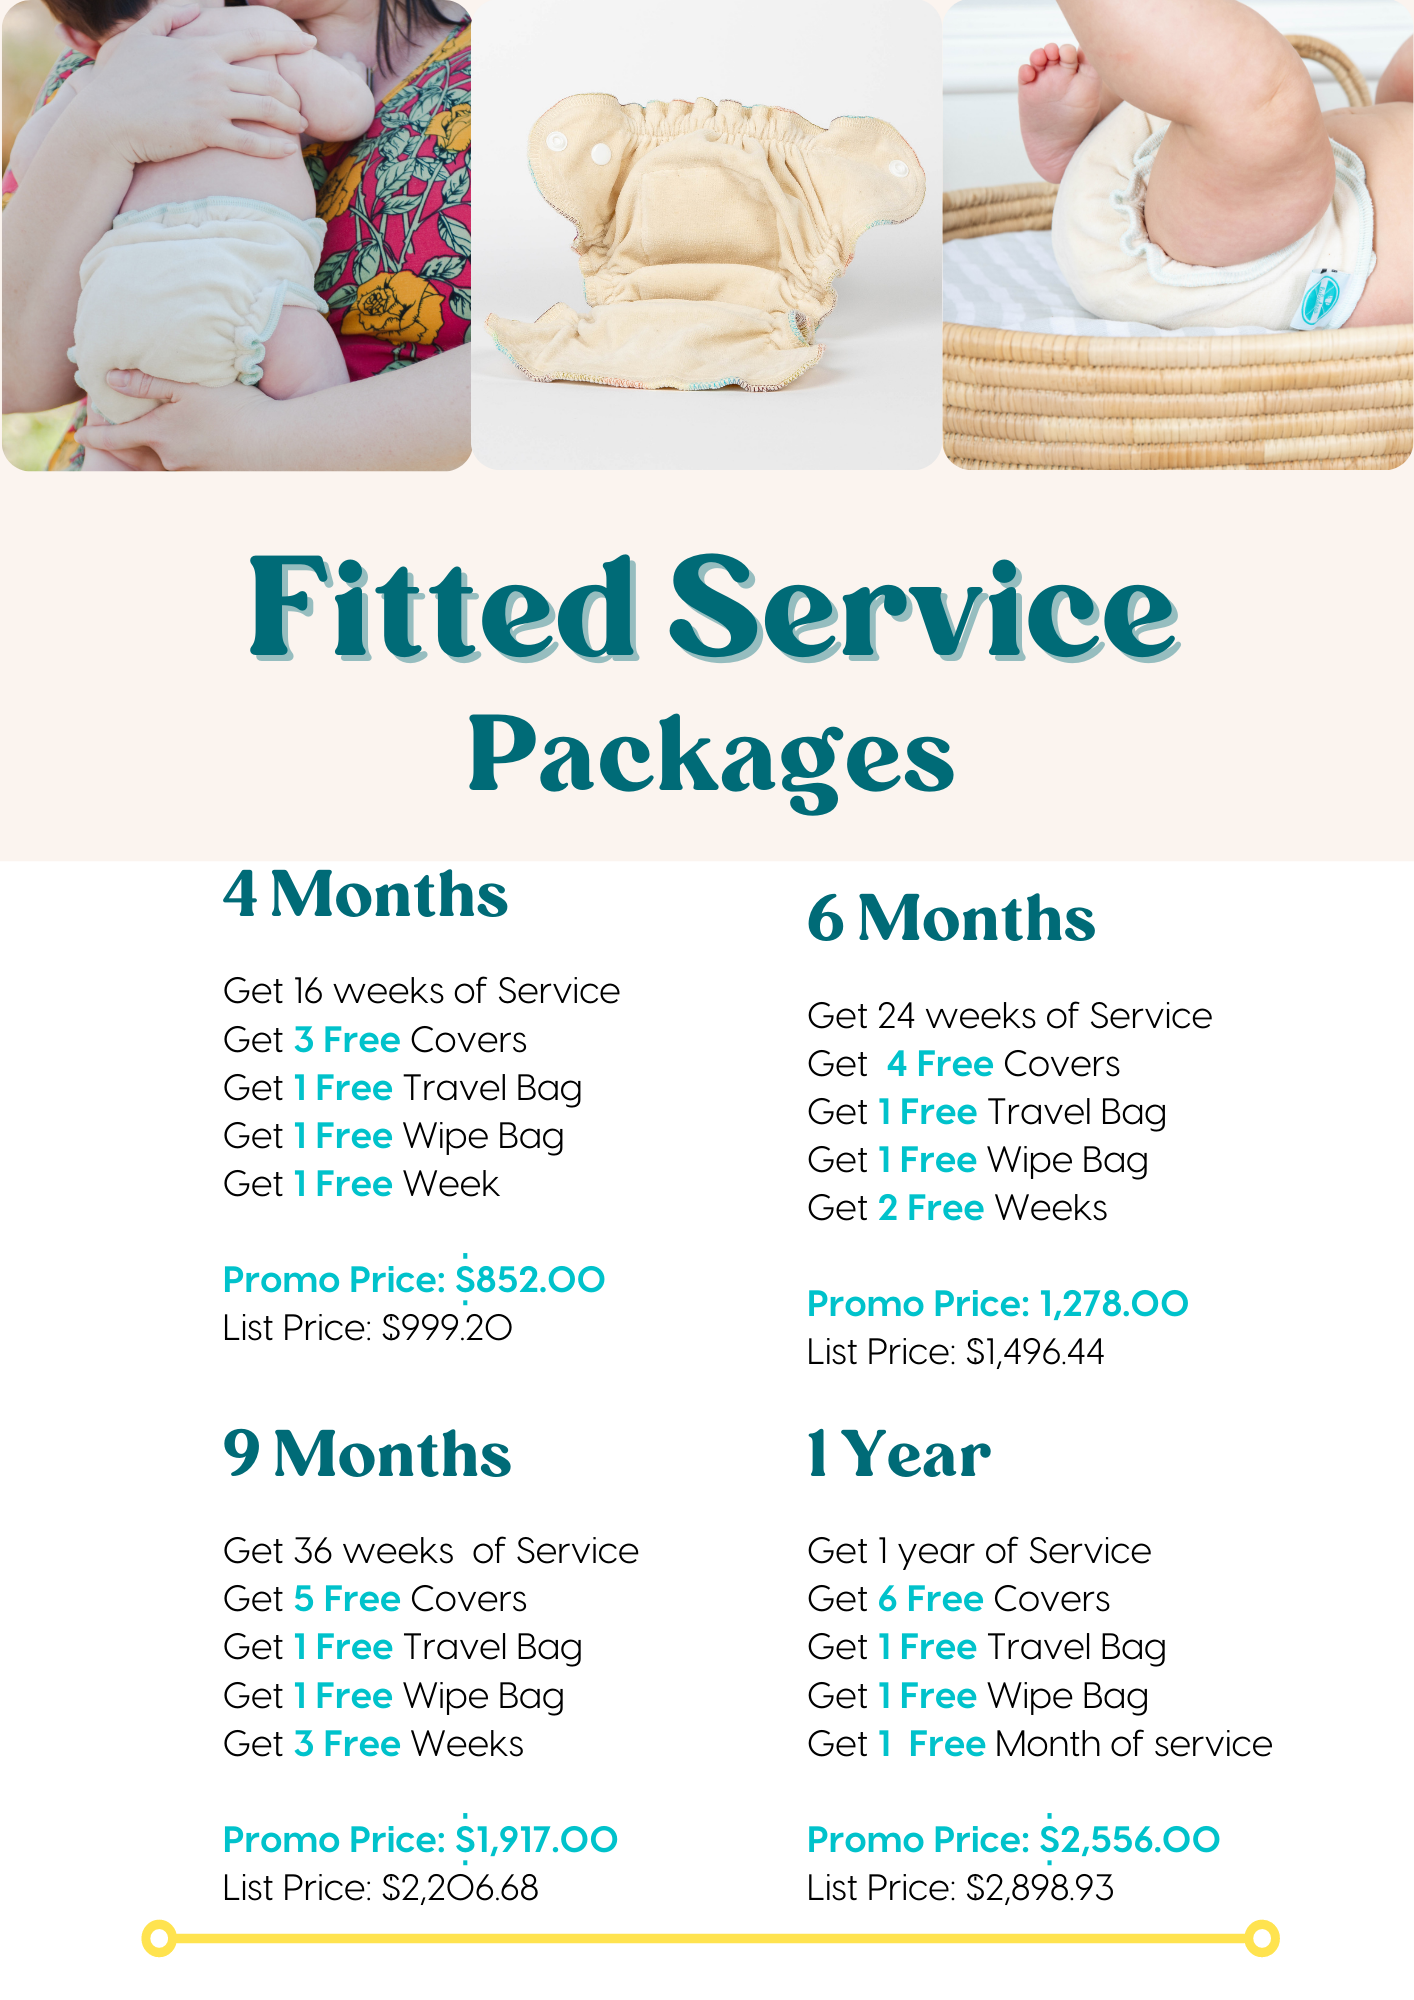 Fitter Service Luludew packages information